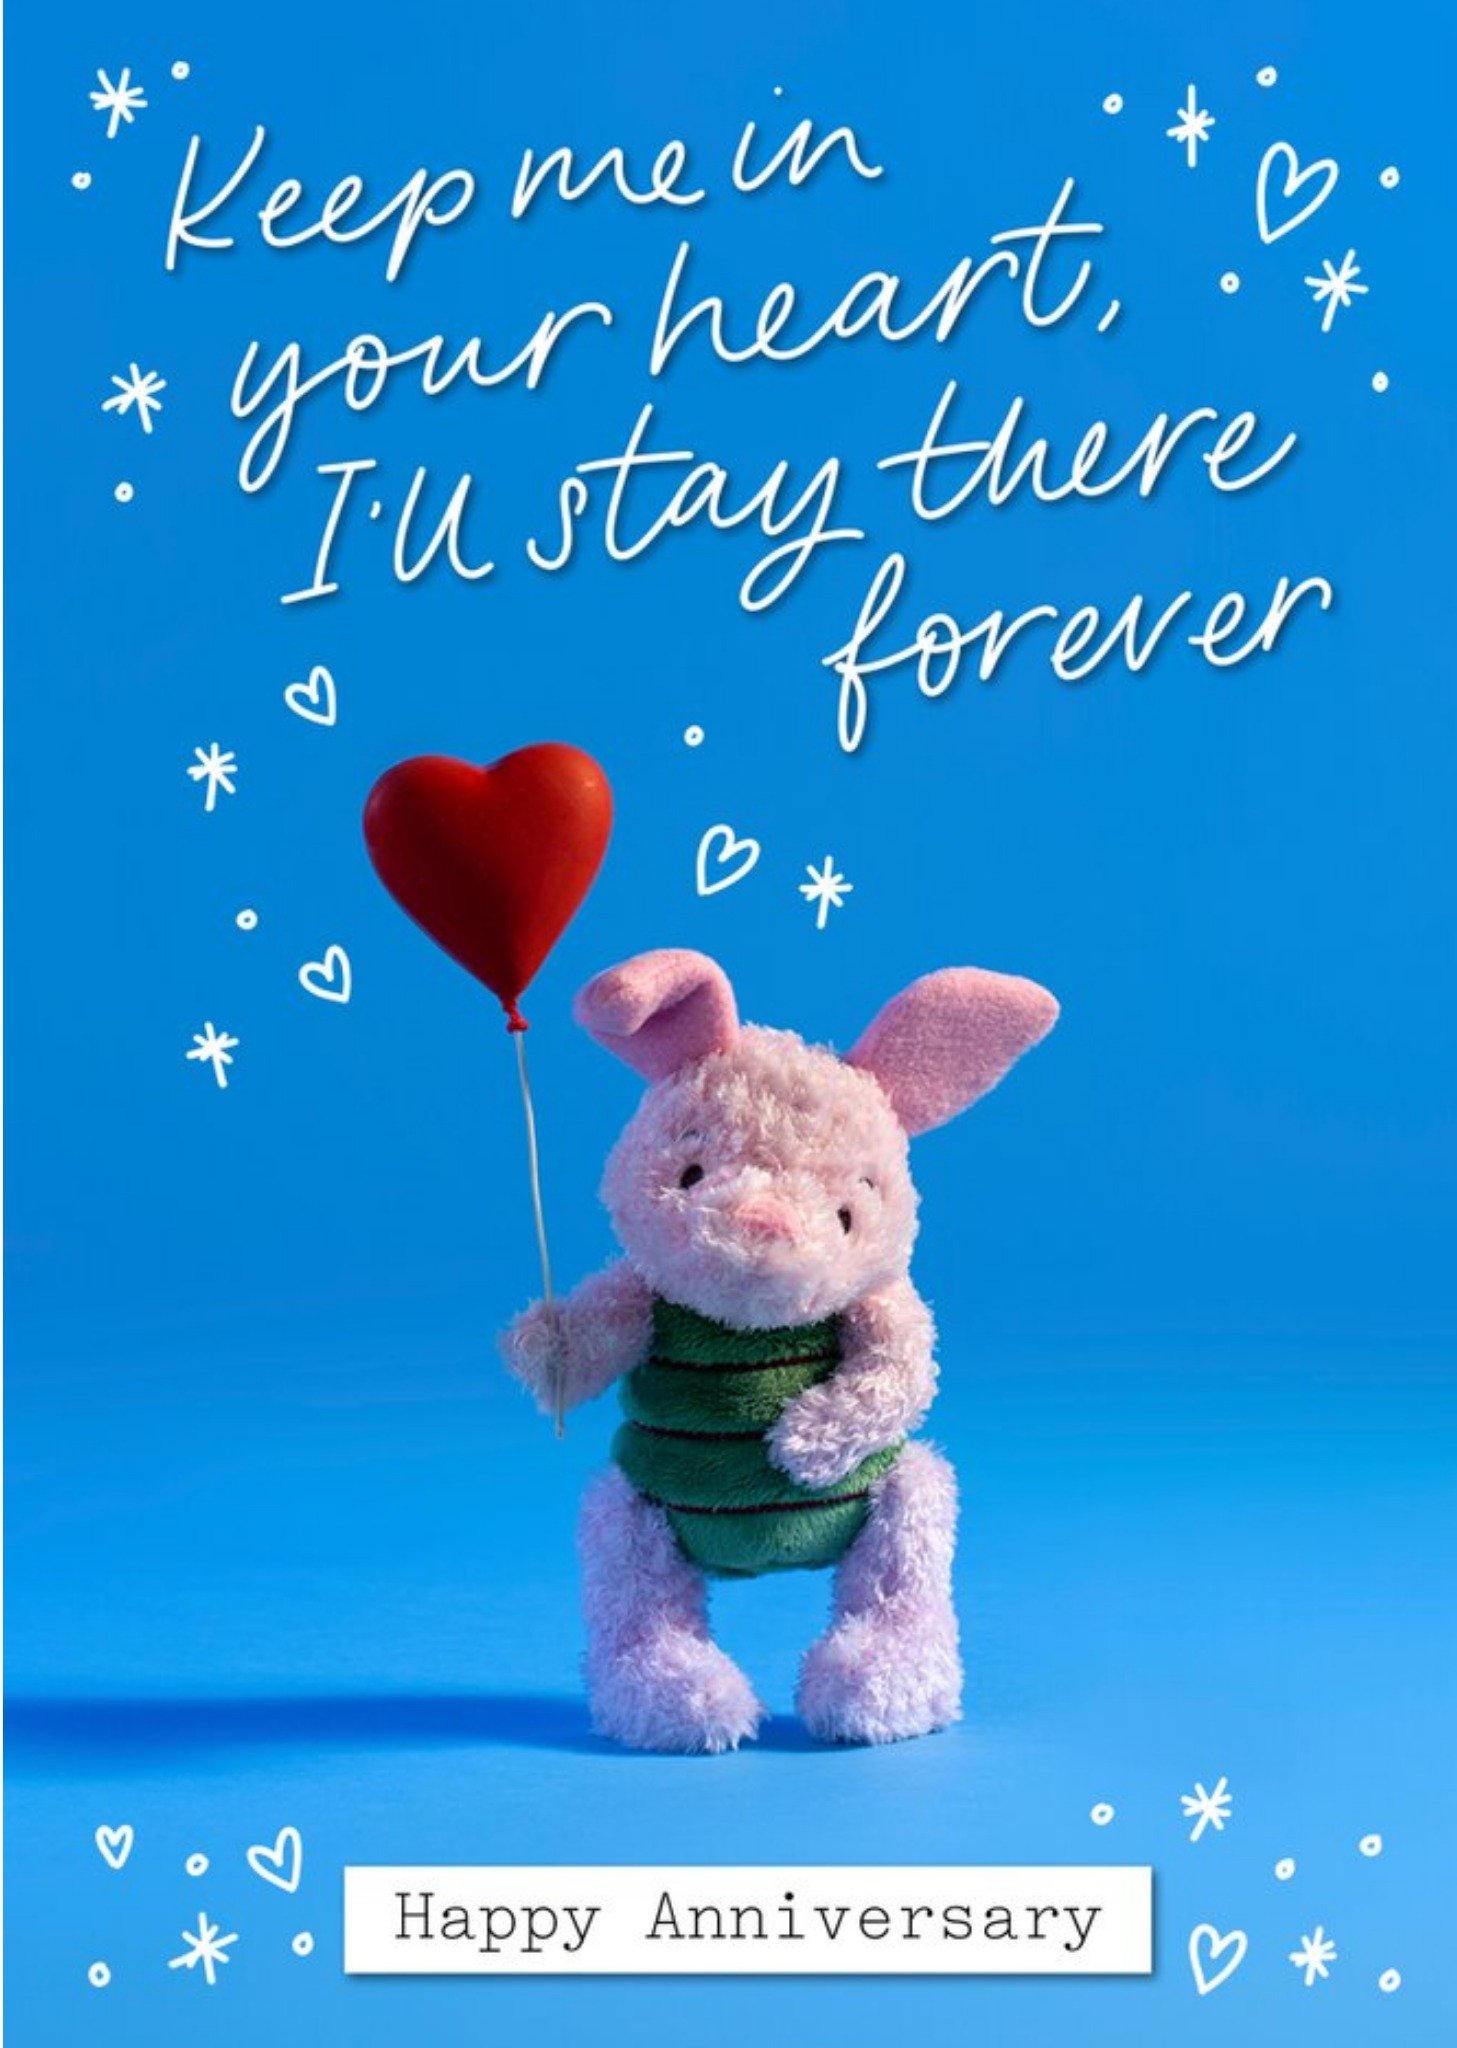 Winnie The Pooh Cute Disney Plush Piglet Keep Me In Your Heart Anniversary Card, Large